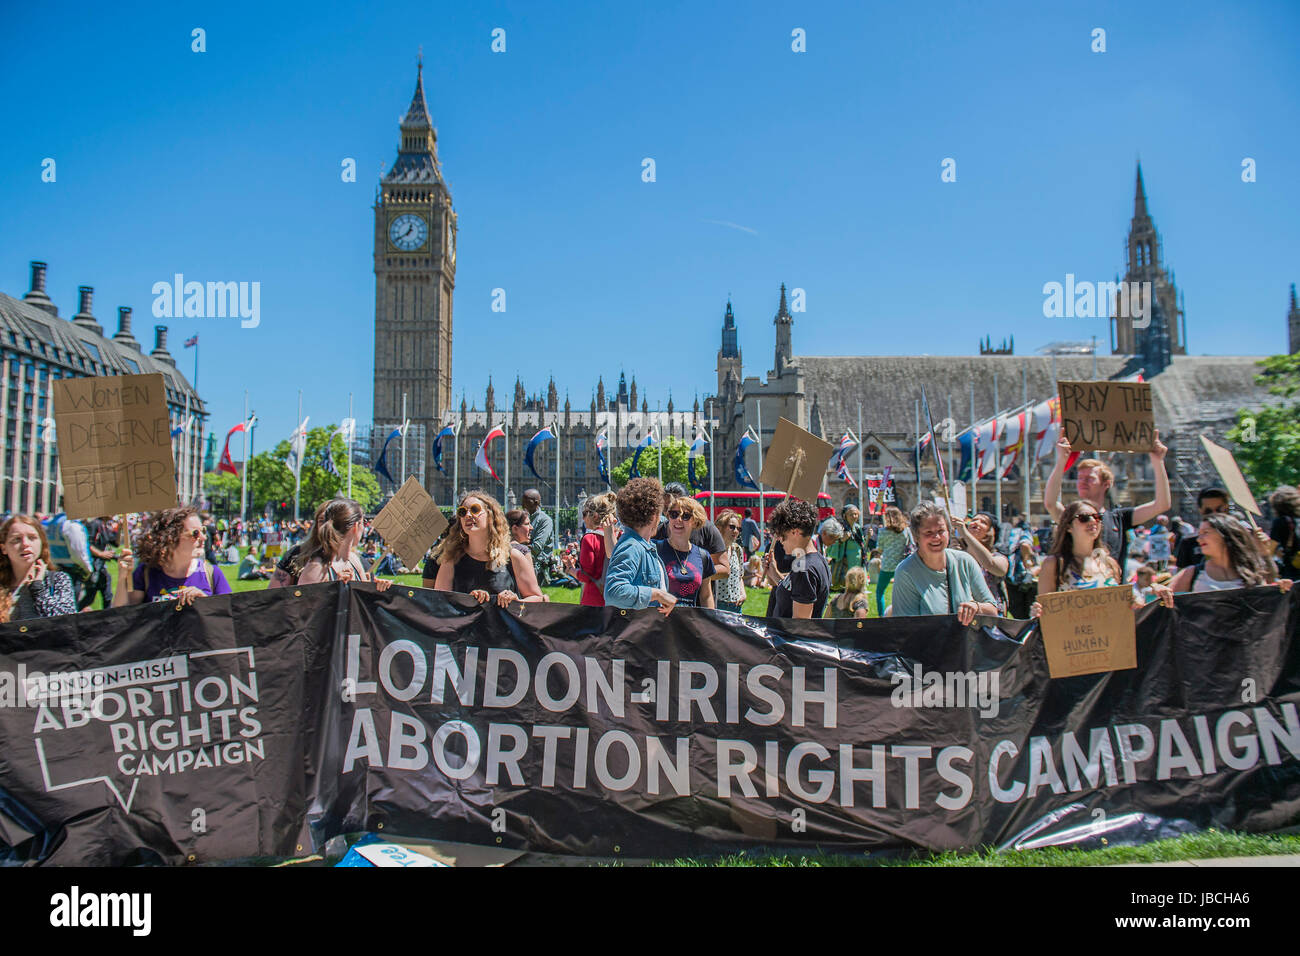 London, UK. 10th June, 2017. The London-Irish abortion rights group demands fair womens rights - A day after the election result protestors gather to ask for Theresa May to quit and not do a deal with the DUP. Who people fear because of their views on abrtion, gay marriage etc. Westminster, London, 10 Jun 2017 Credit: Guy Bell/Alamy Live News Stock Photo